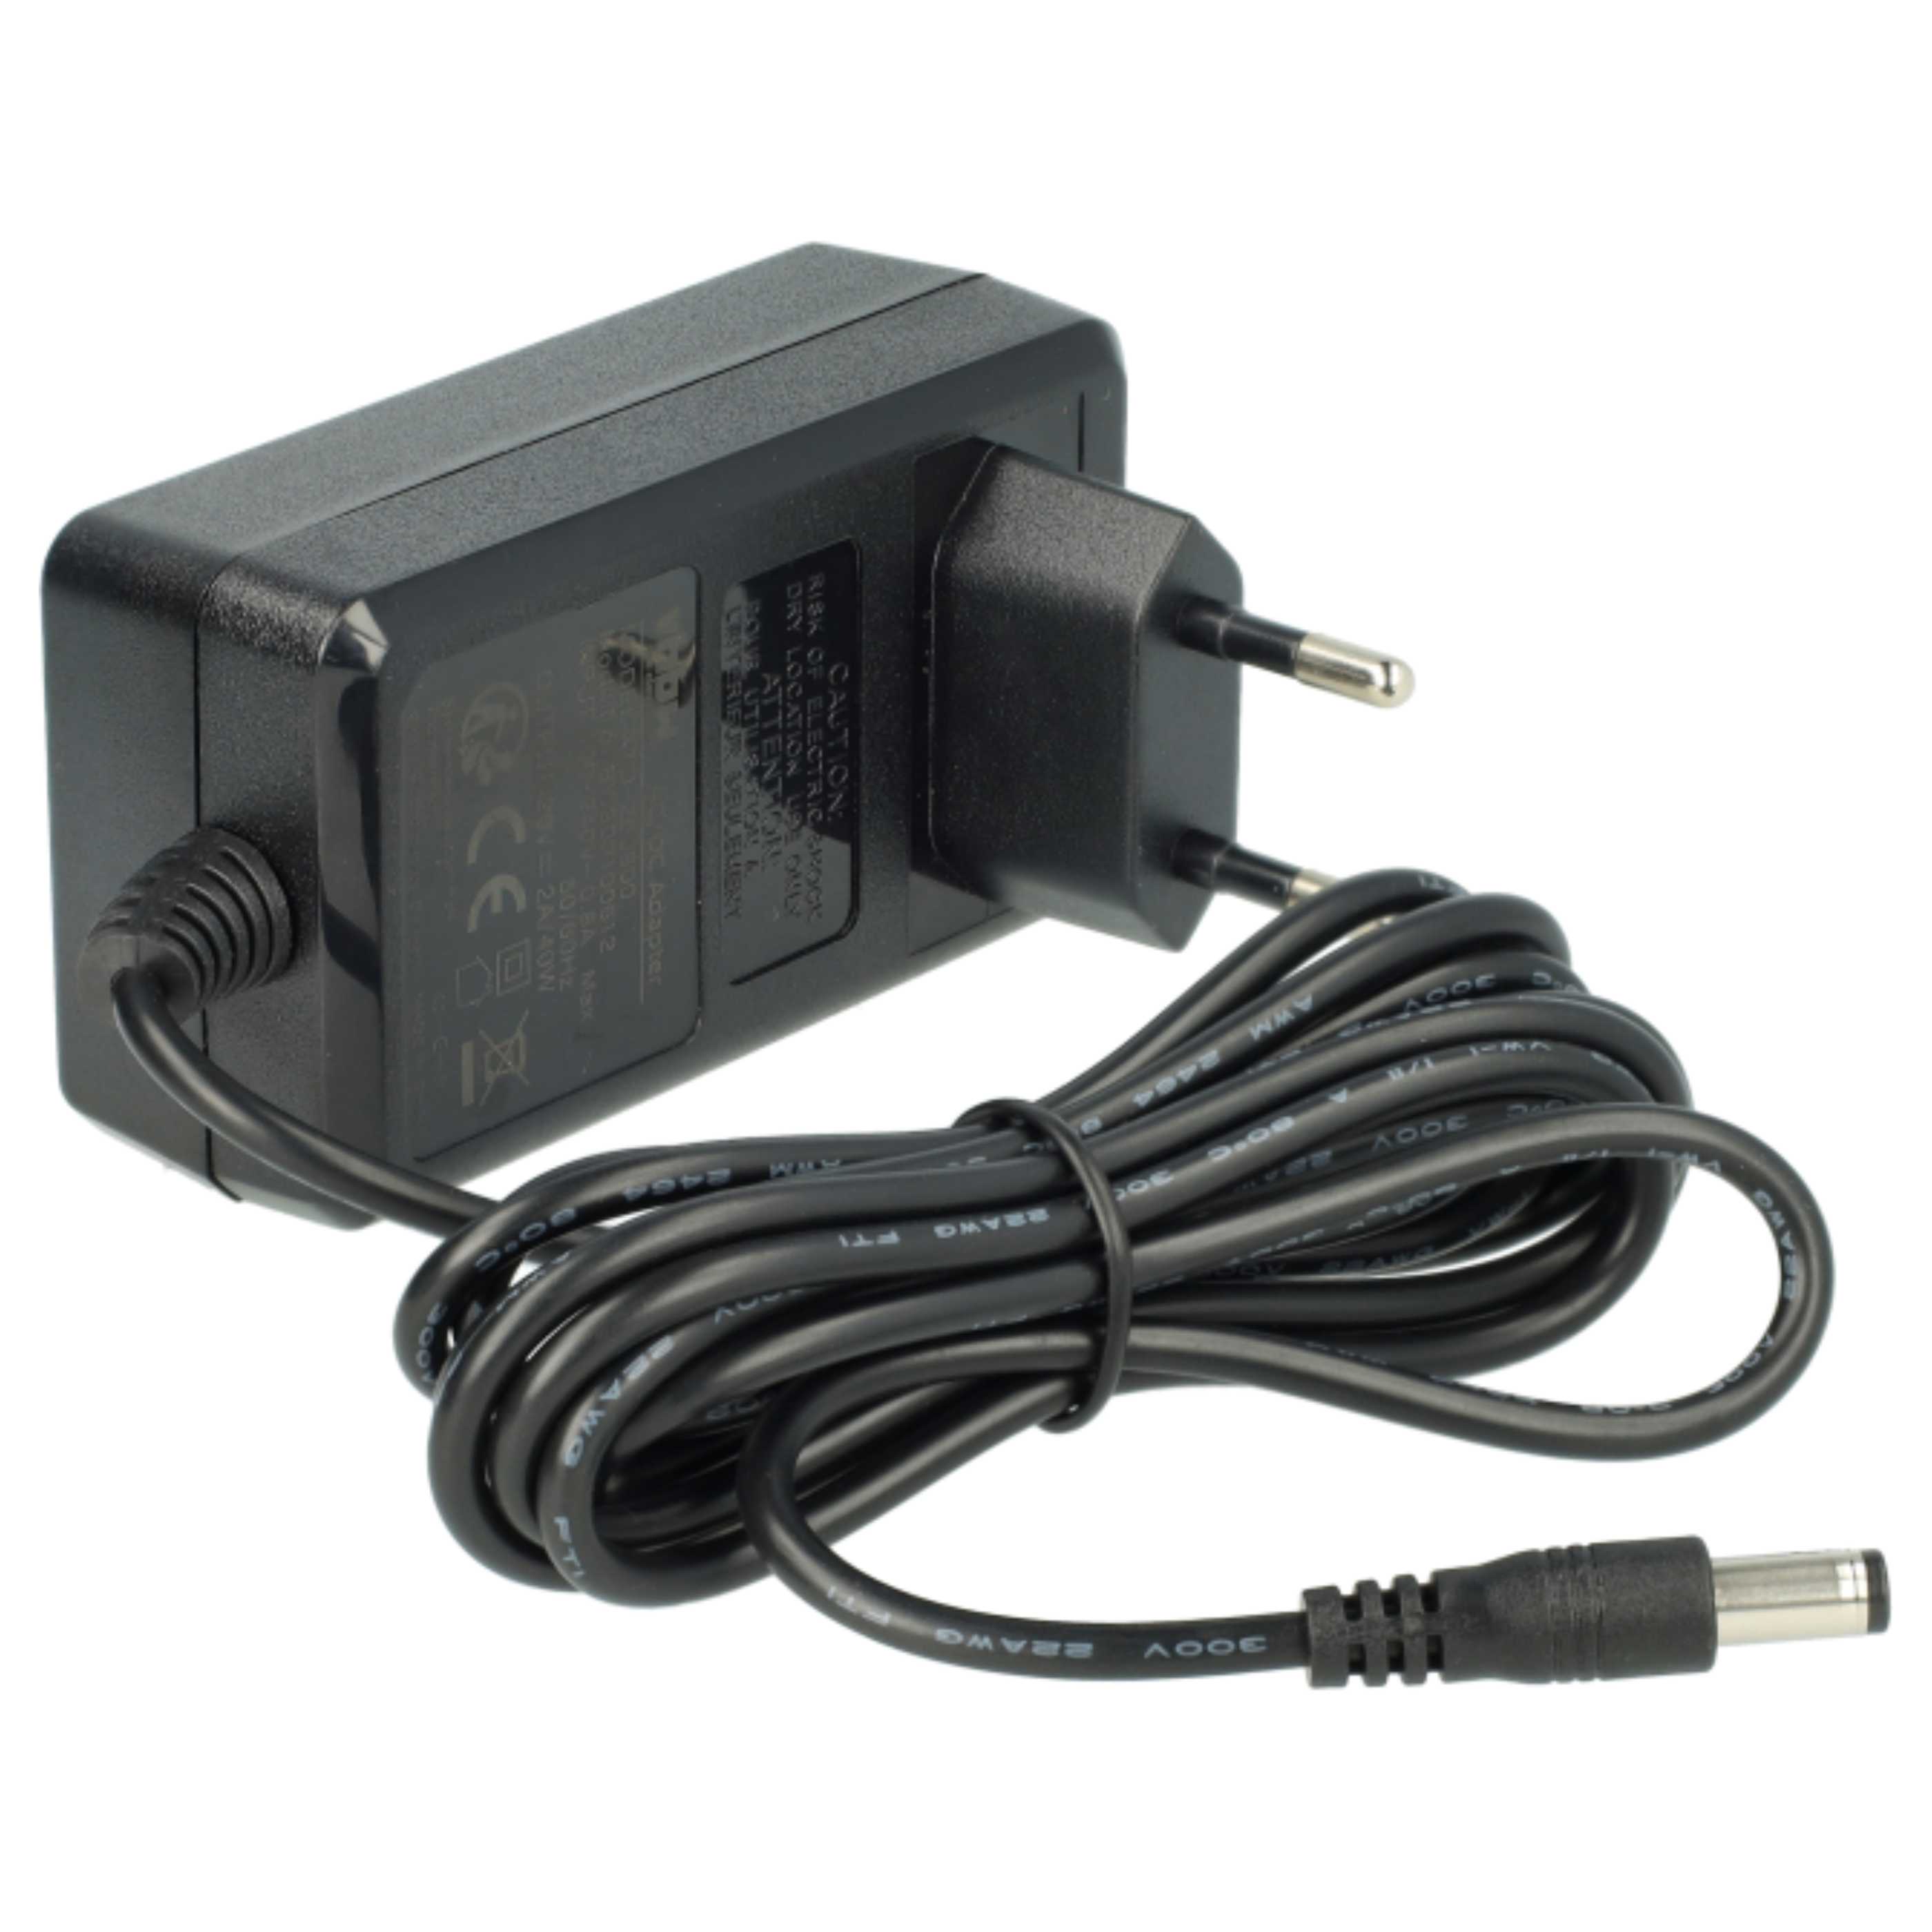 Mains Power Adapter replaces LG ZH-65-202 for LGNotebook, 40 W